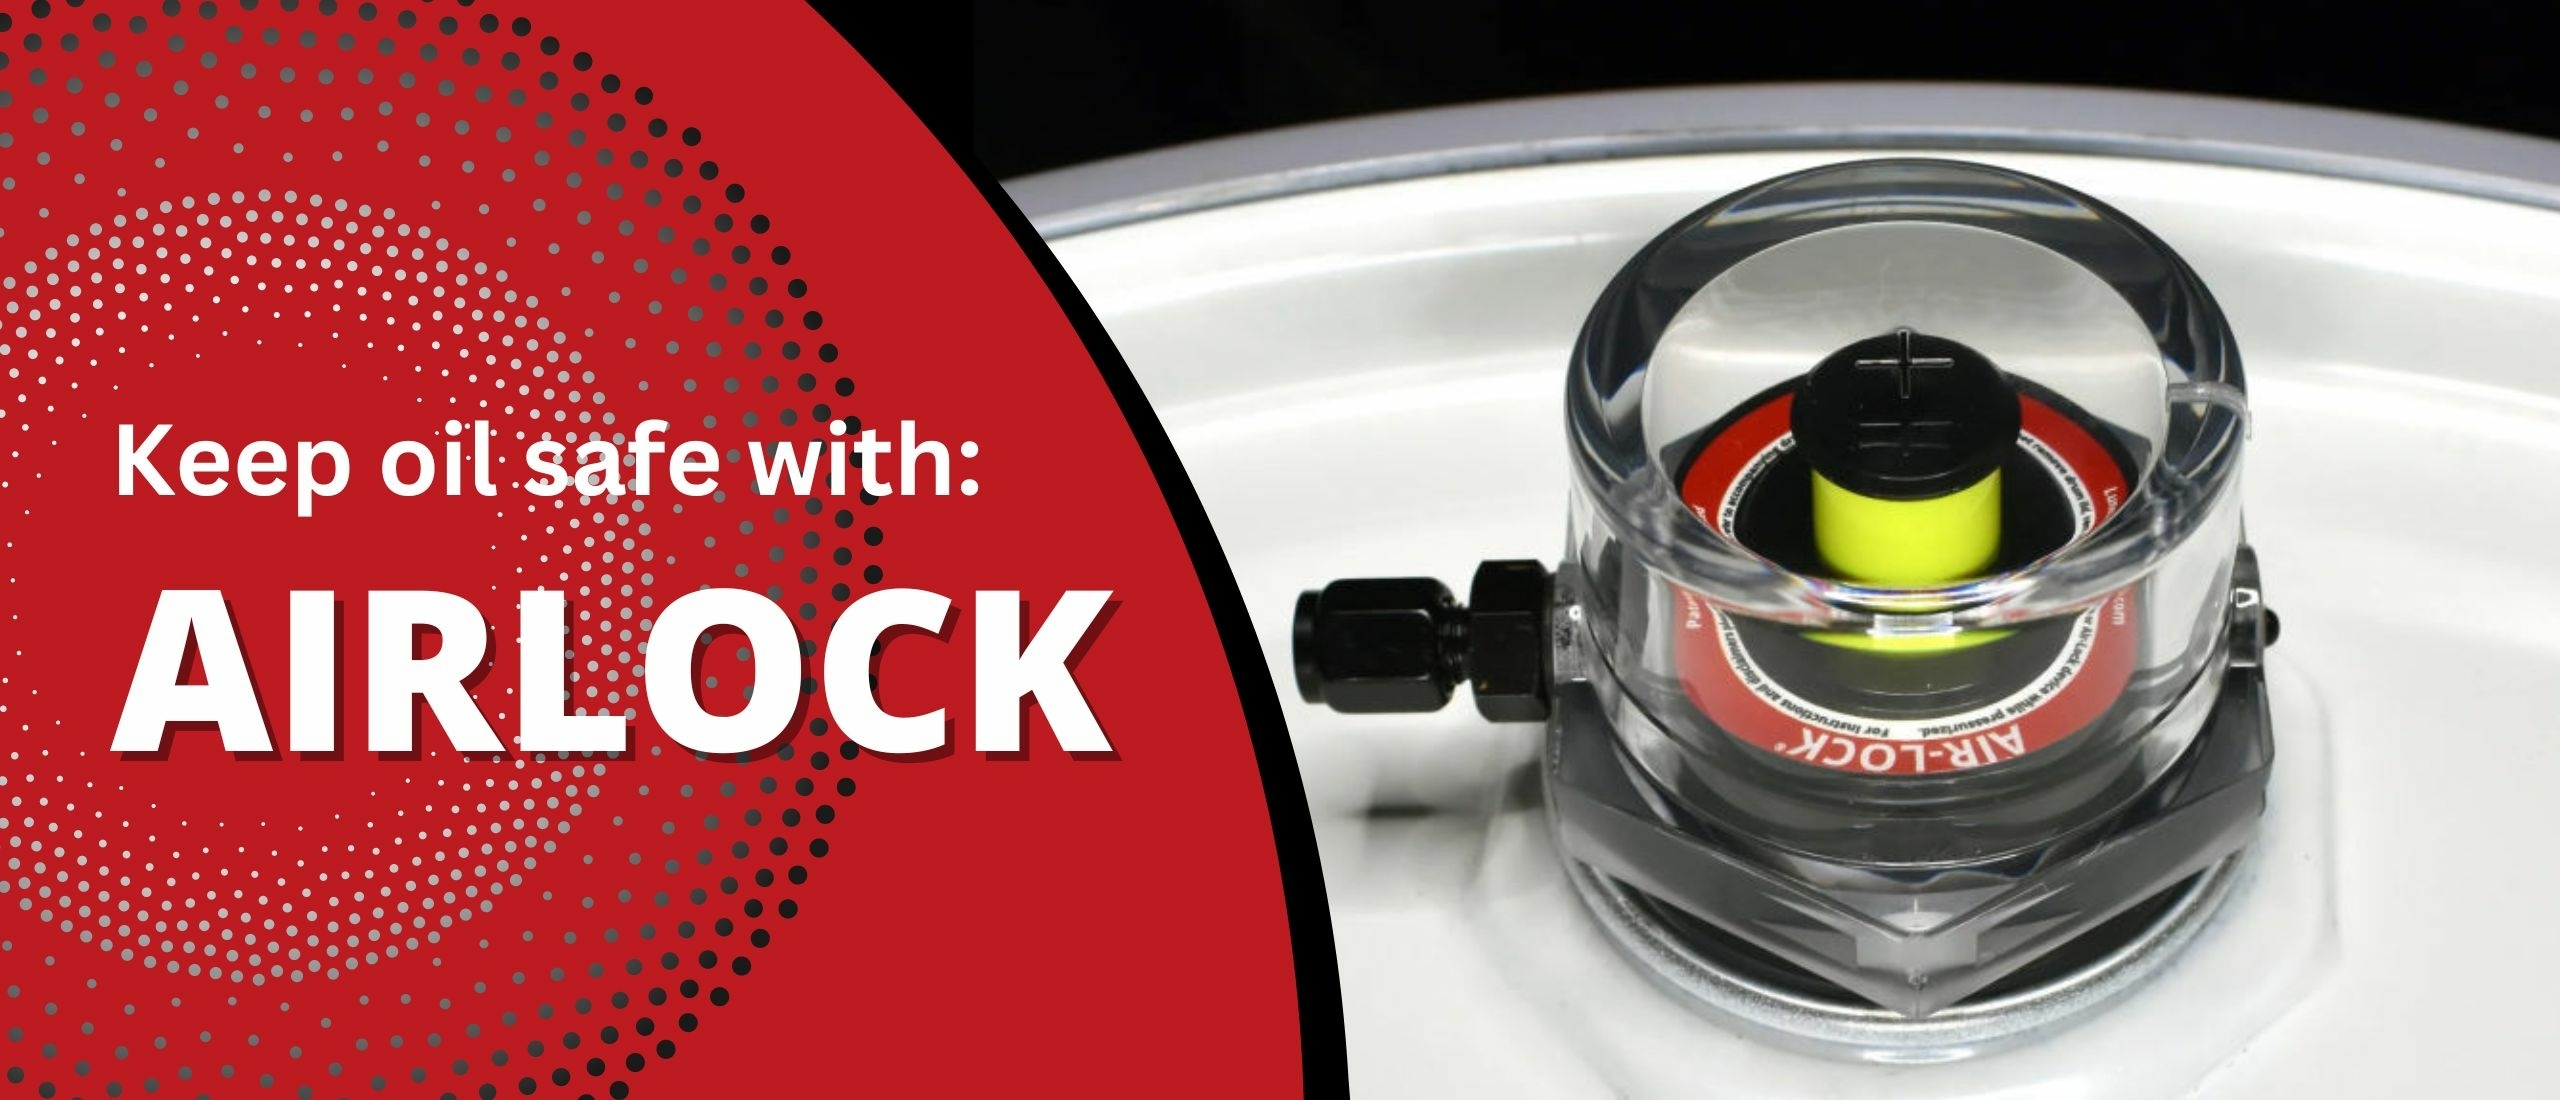 Keep oil safe with Airlock